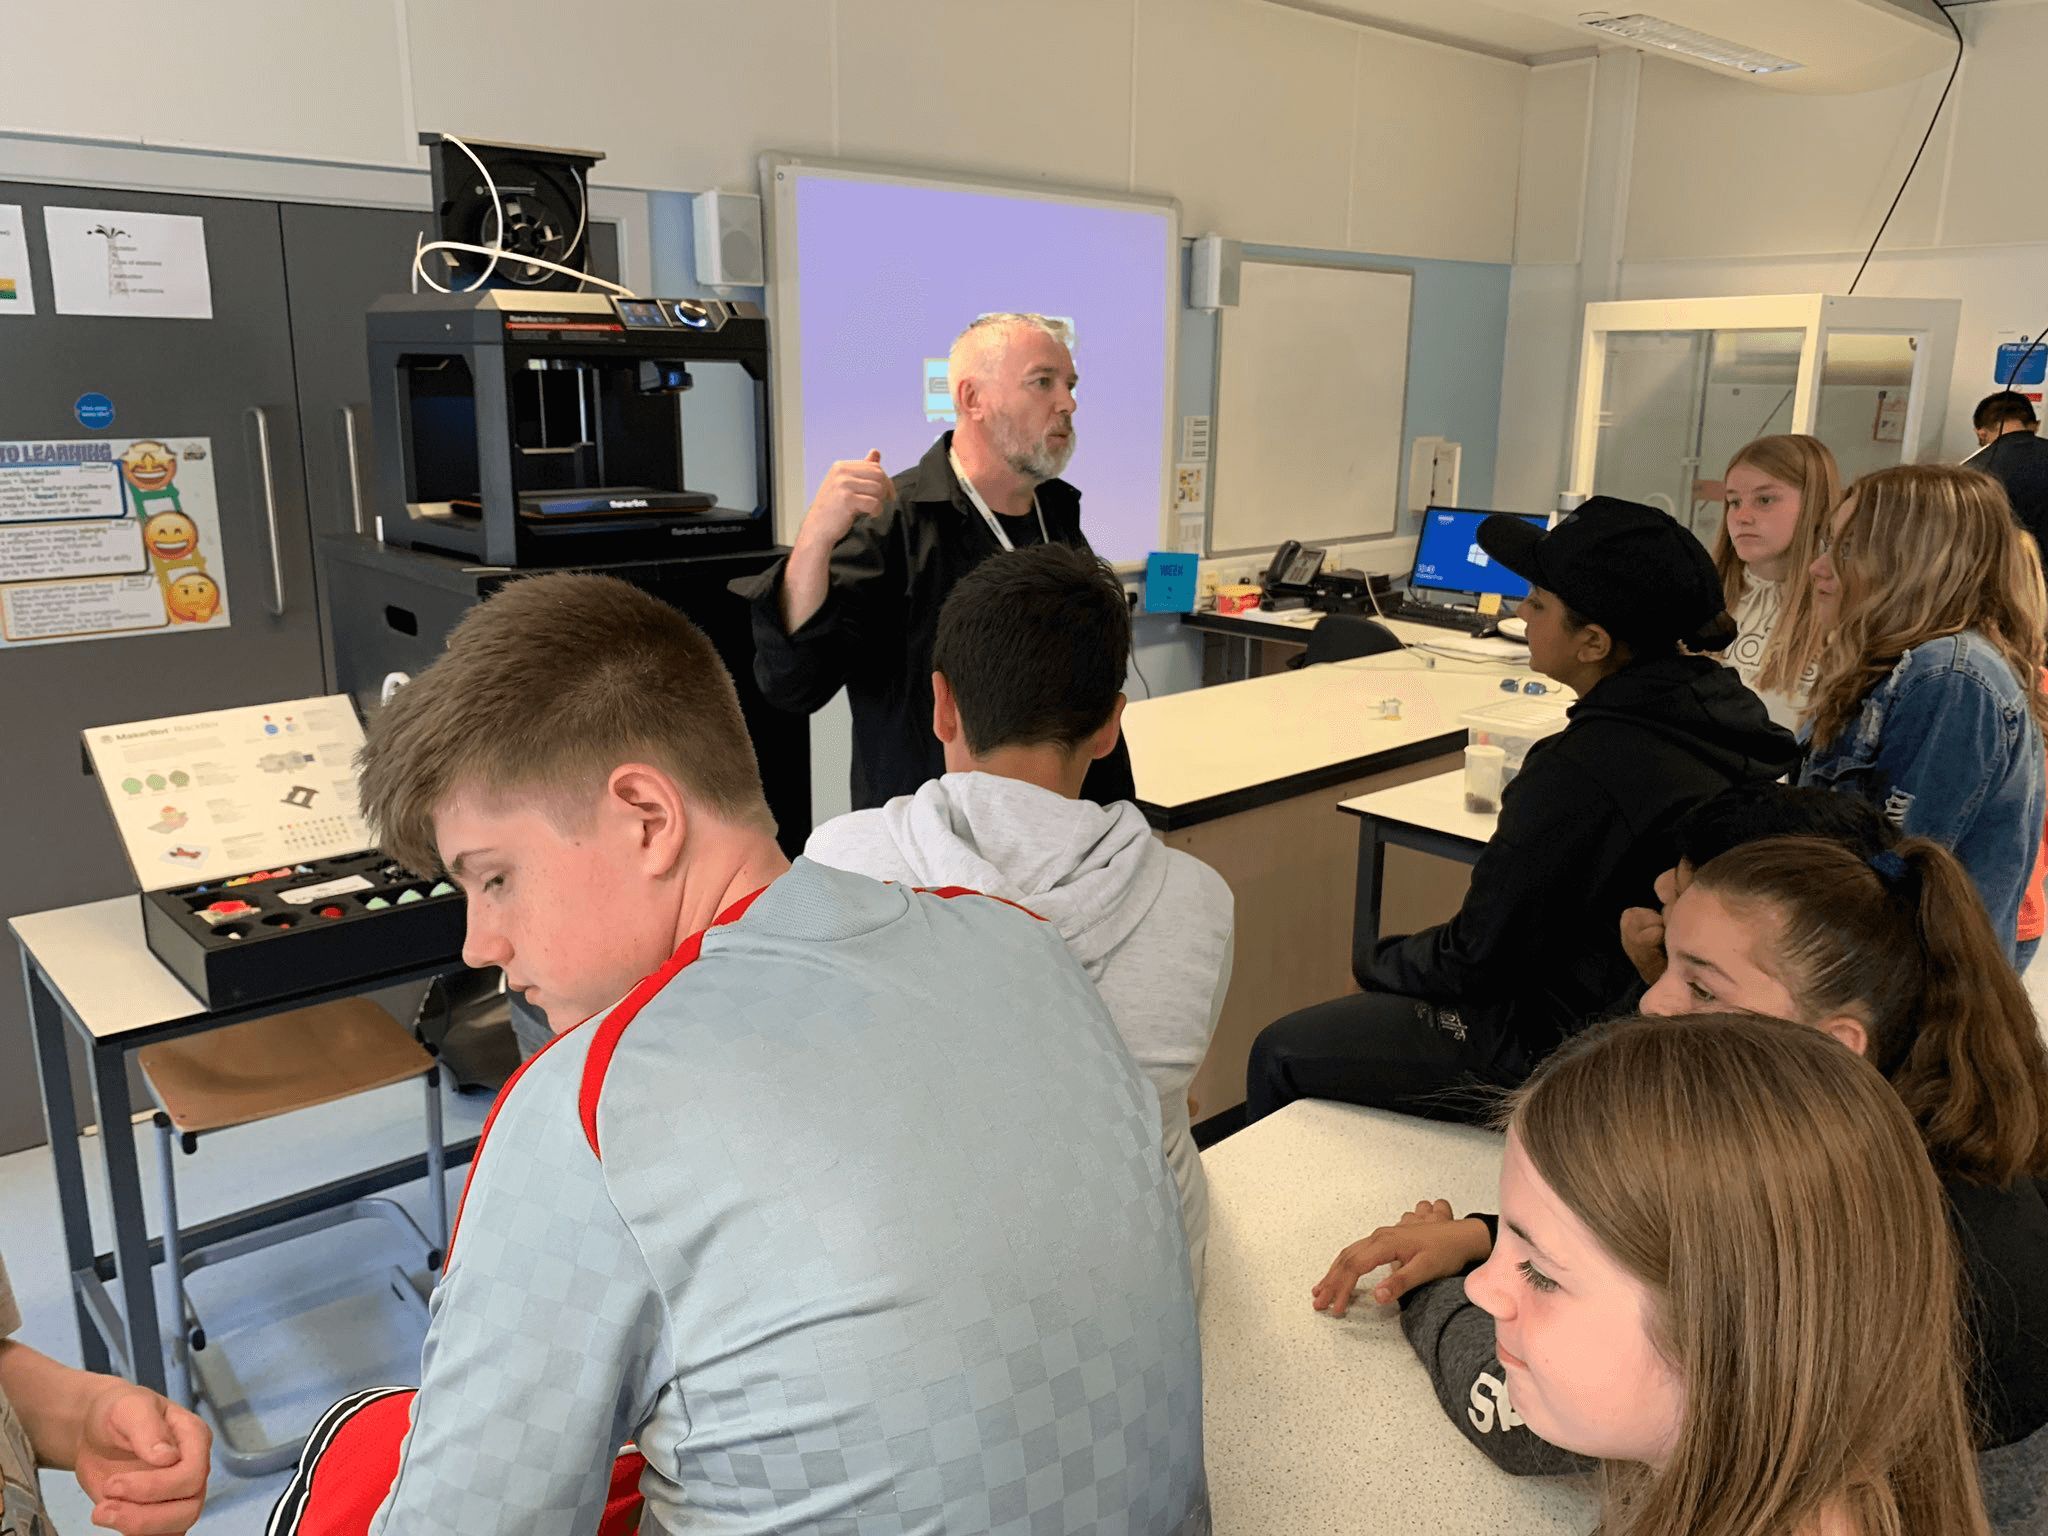 Shropshire 3D has installed 3D printing and STEM products into its 275th school